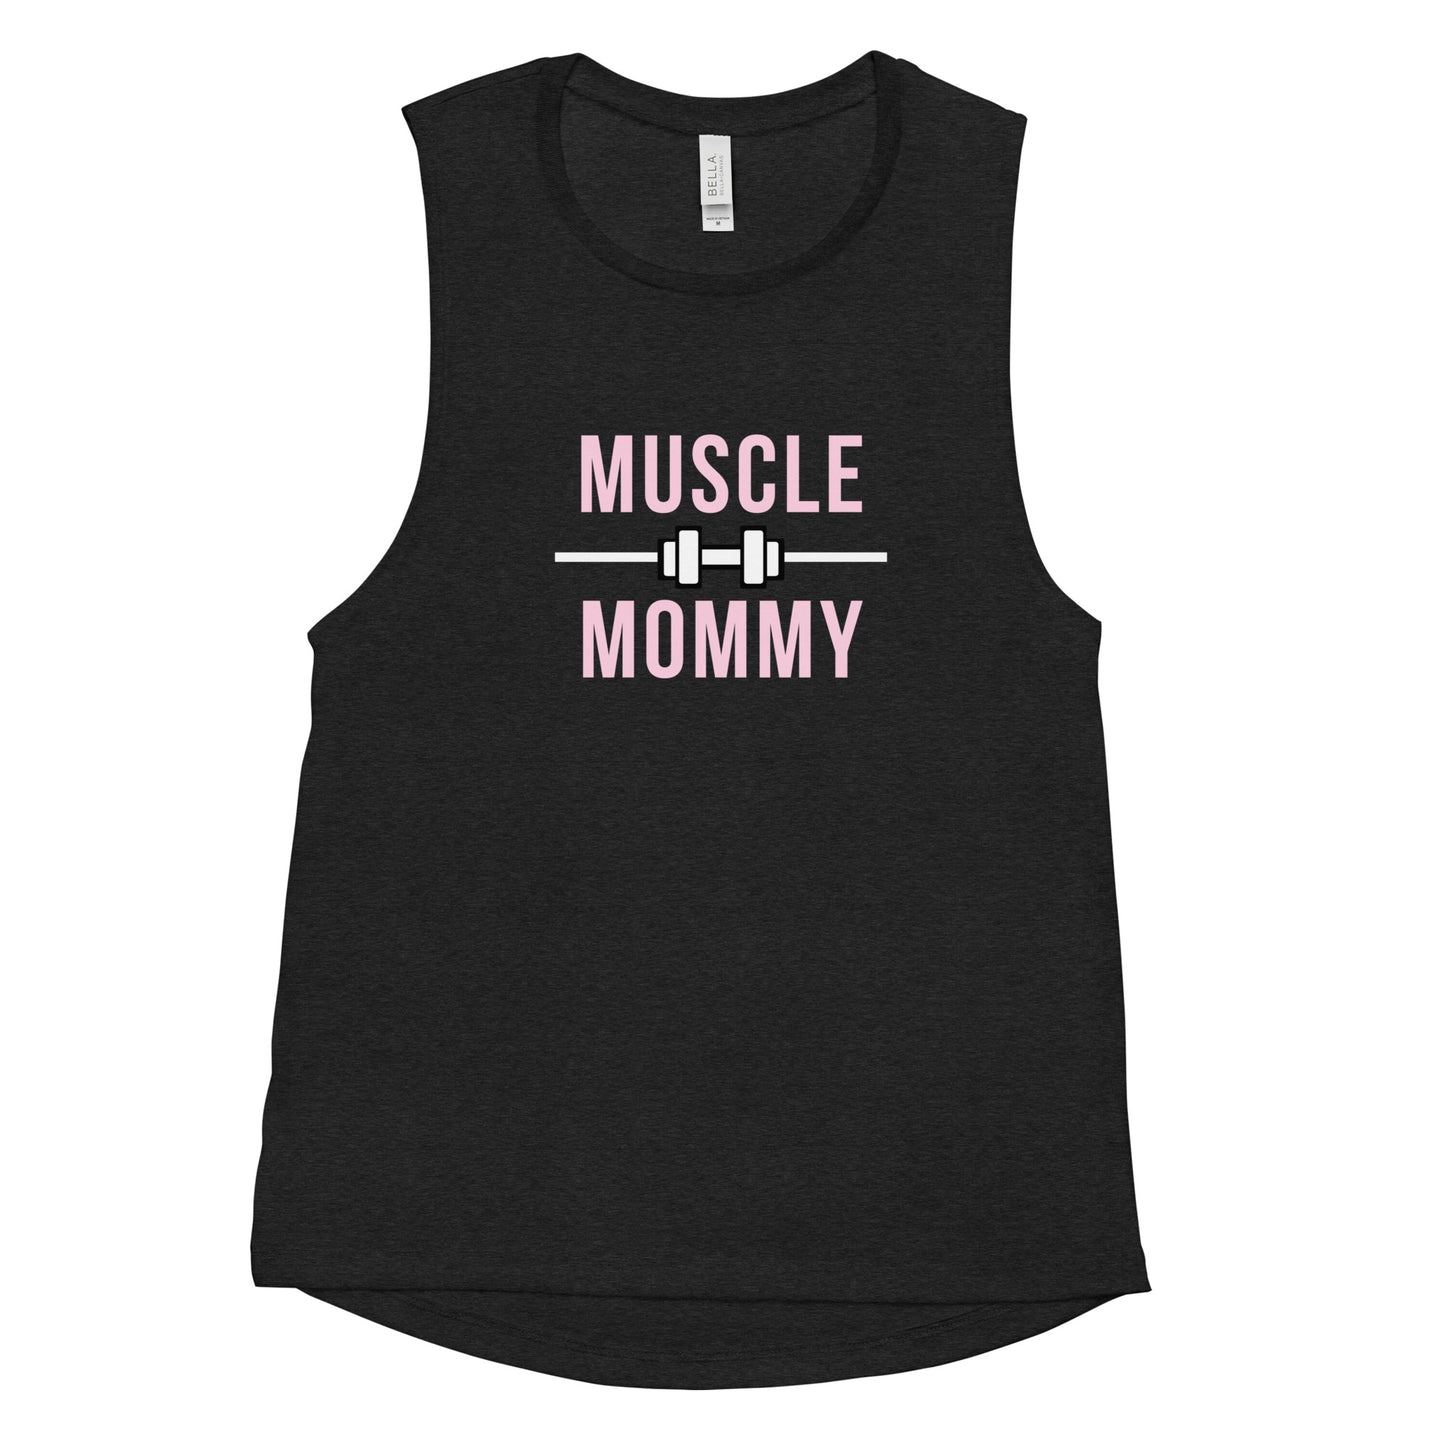 Muscle Mommy Muscle Tank